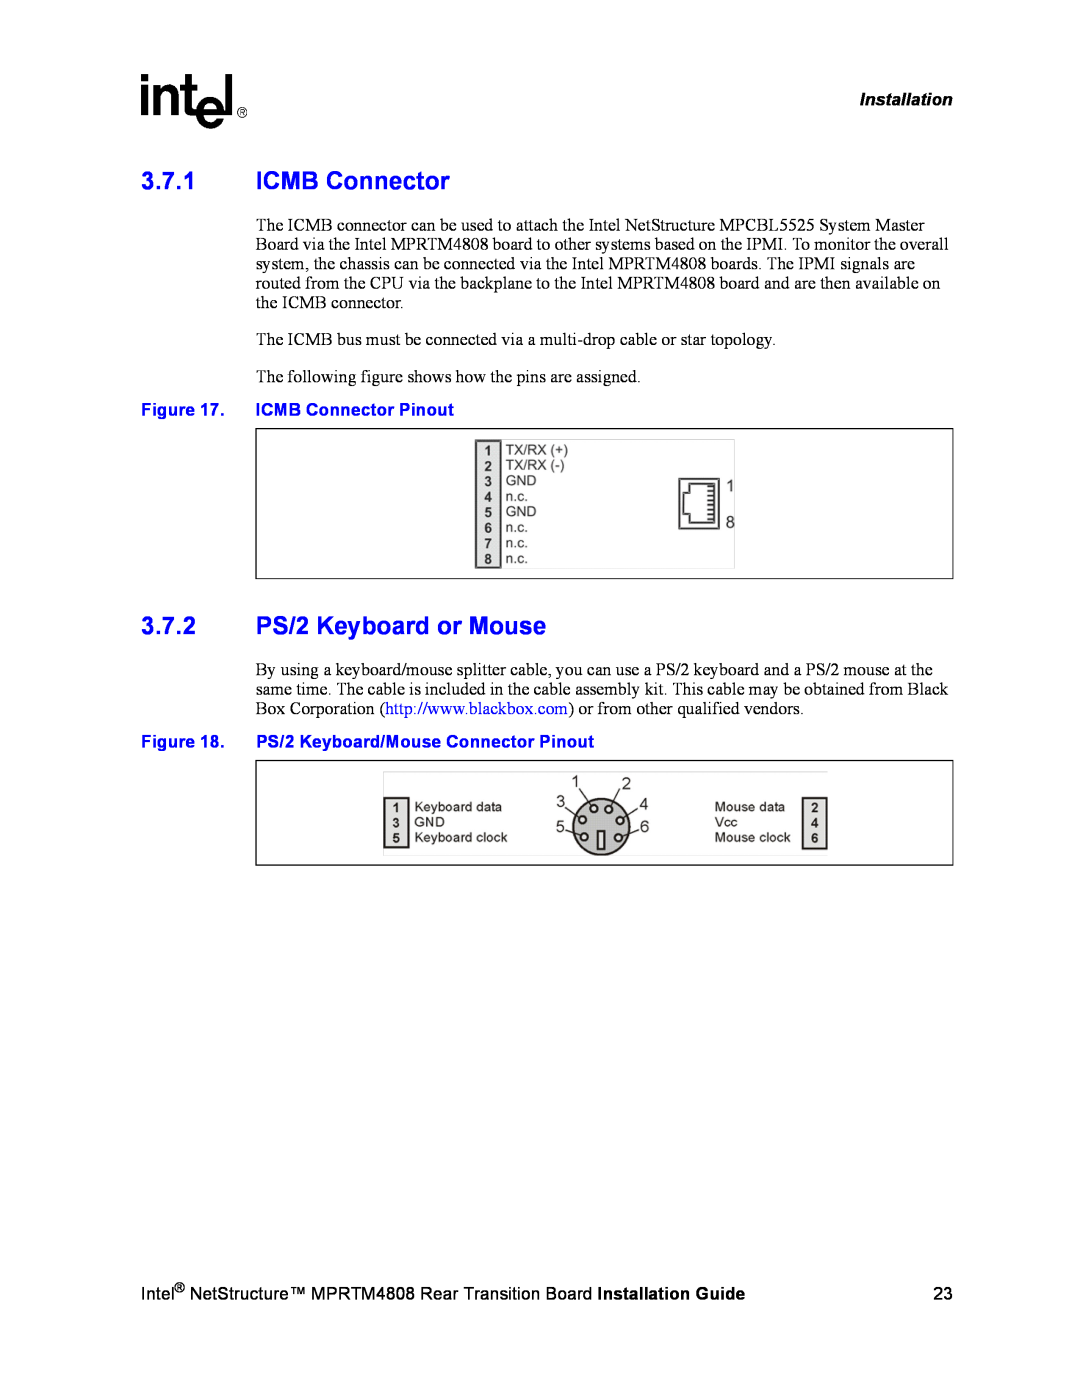 Intel MPRTM4808 manual 3.7.1ICMB Connector, 3.7.2PS/2 Keyboard or Mouse, ICMB Connector Pinout, Installation 